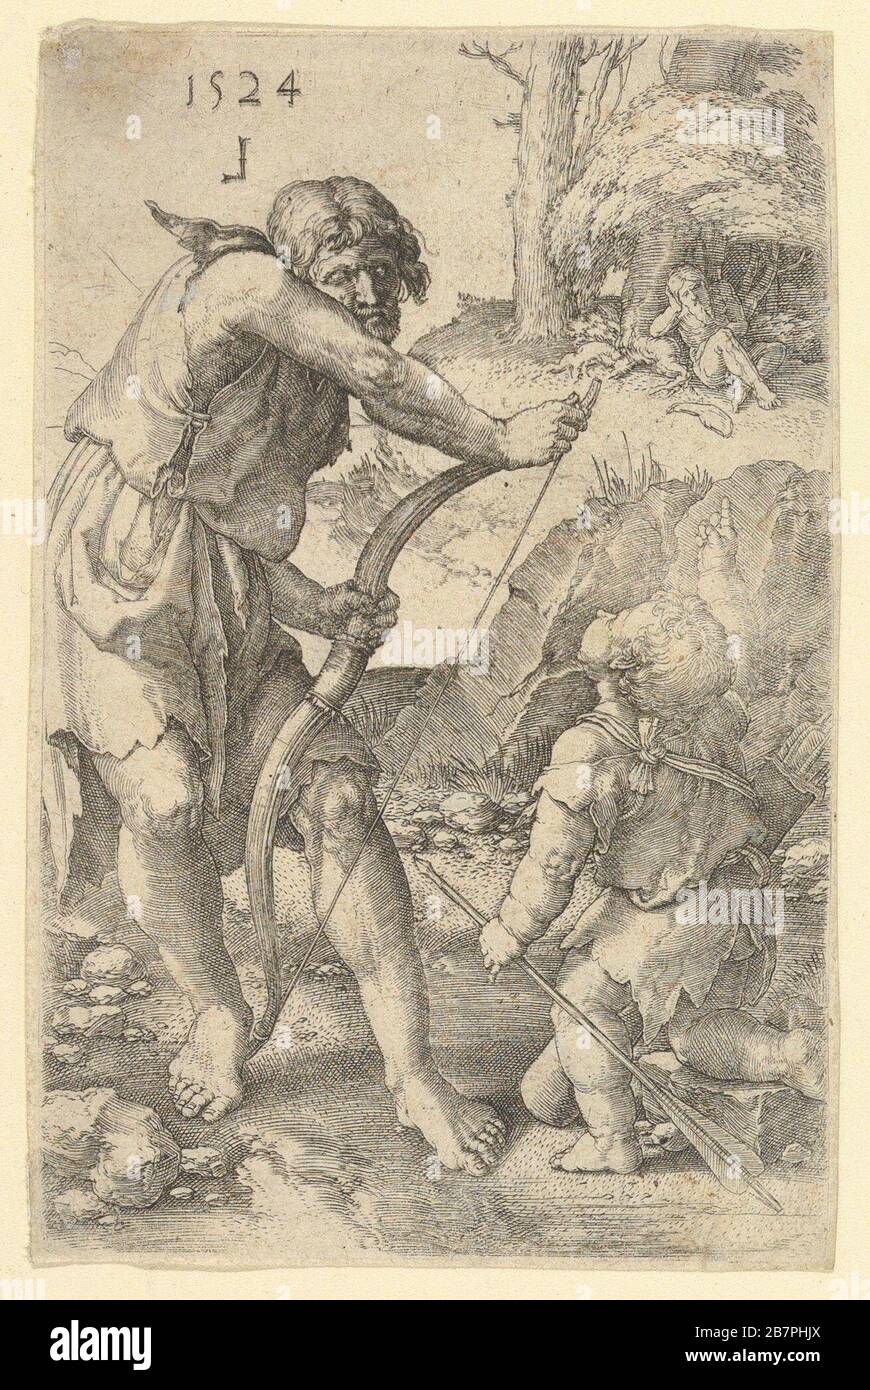 Lamech and Cain, 1524. Stock Photo